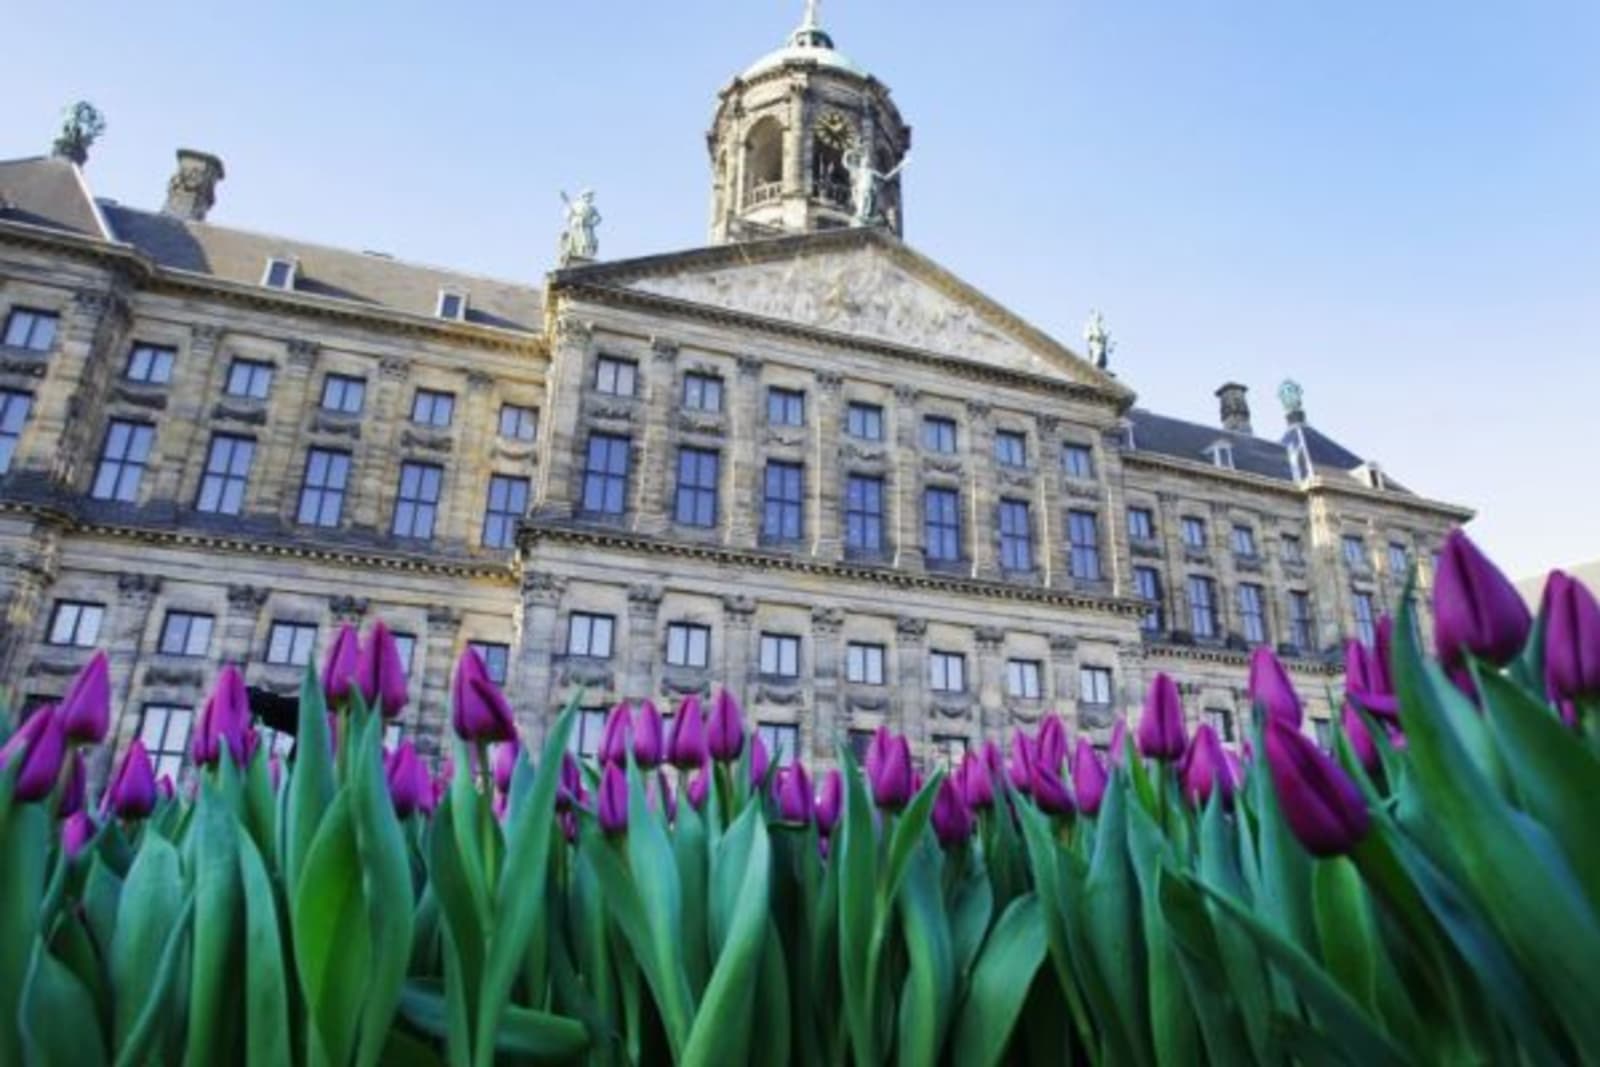 Purple flowers in front of the Royal Palace of Amsterdam